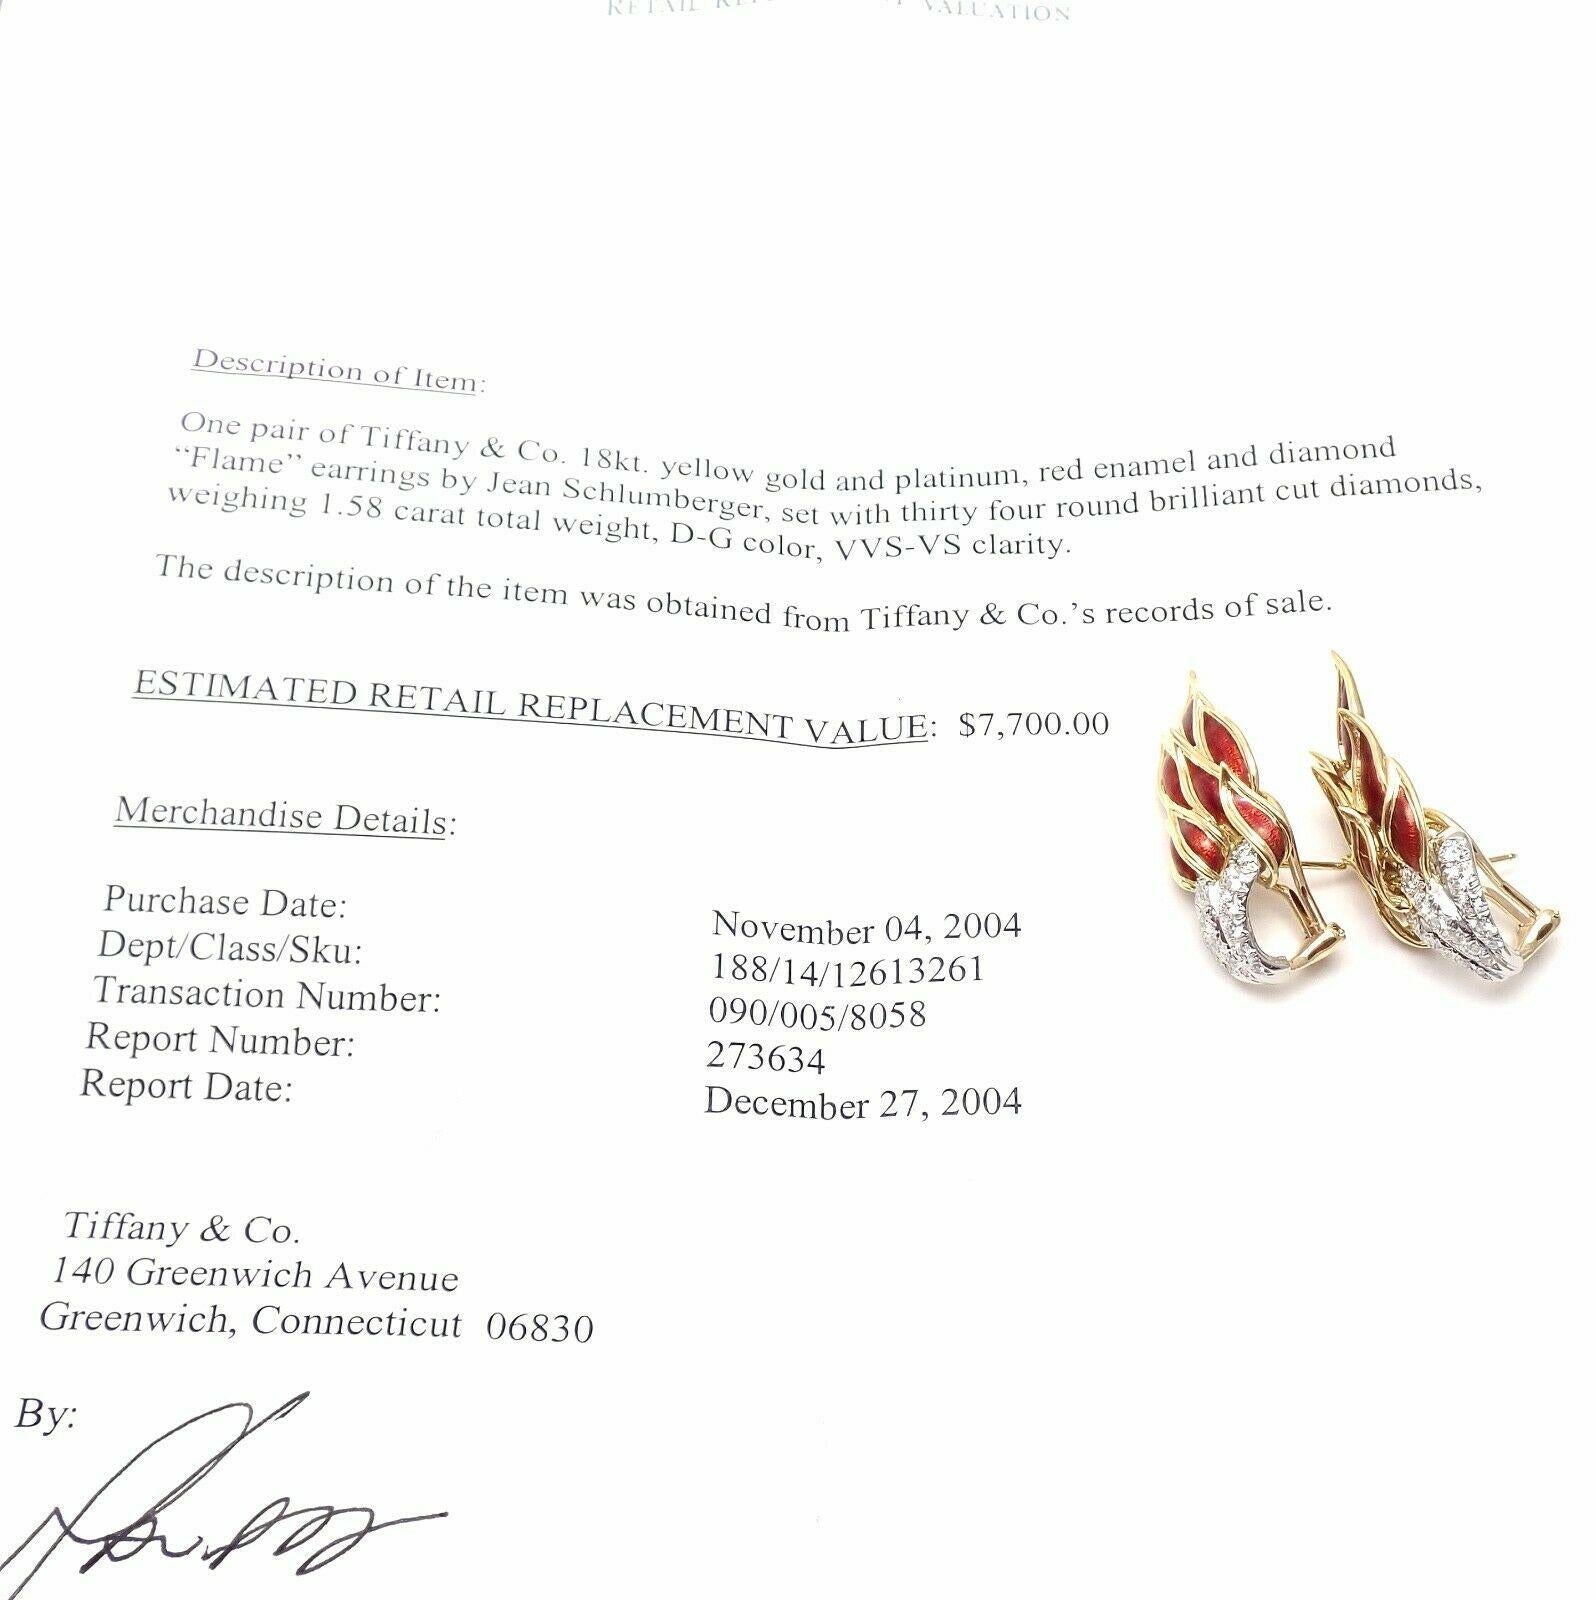 18k Yellow Gold Diamond & Red Enamel Jean Schlumberger Flame Earrings for Tiffany & Co. 
With 34 round brilliant cut diamonds VVS1 clarity, D color total weight approximately 1.58ct 
Red enamel.
These earrings are made for pierced ears.
These